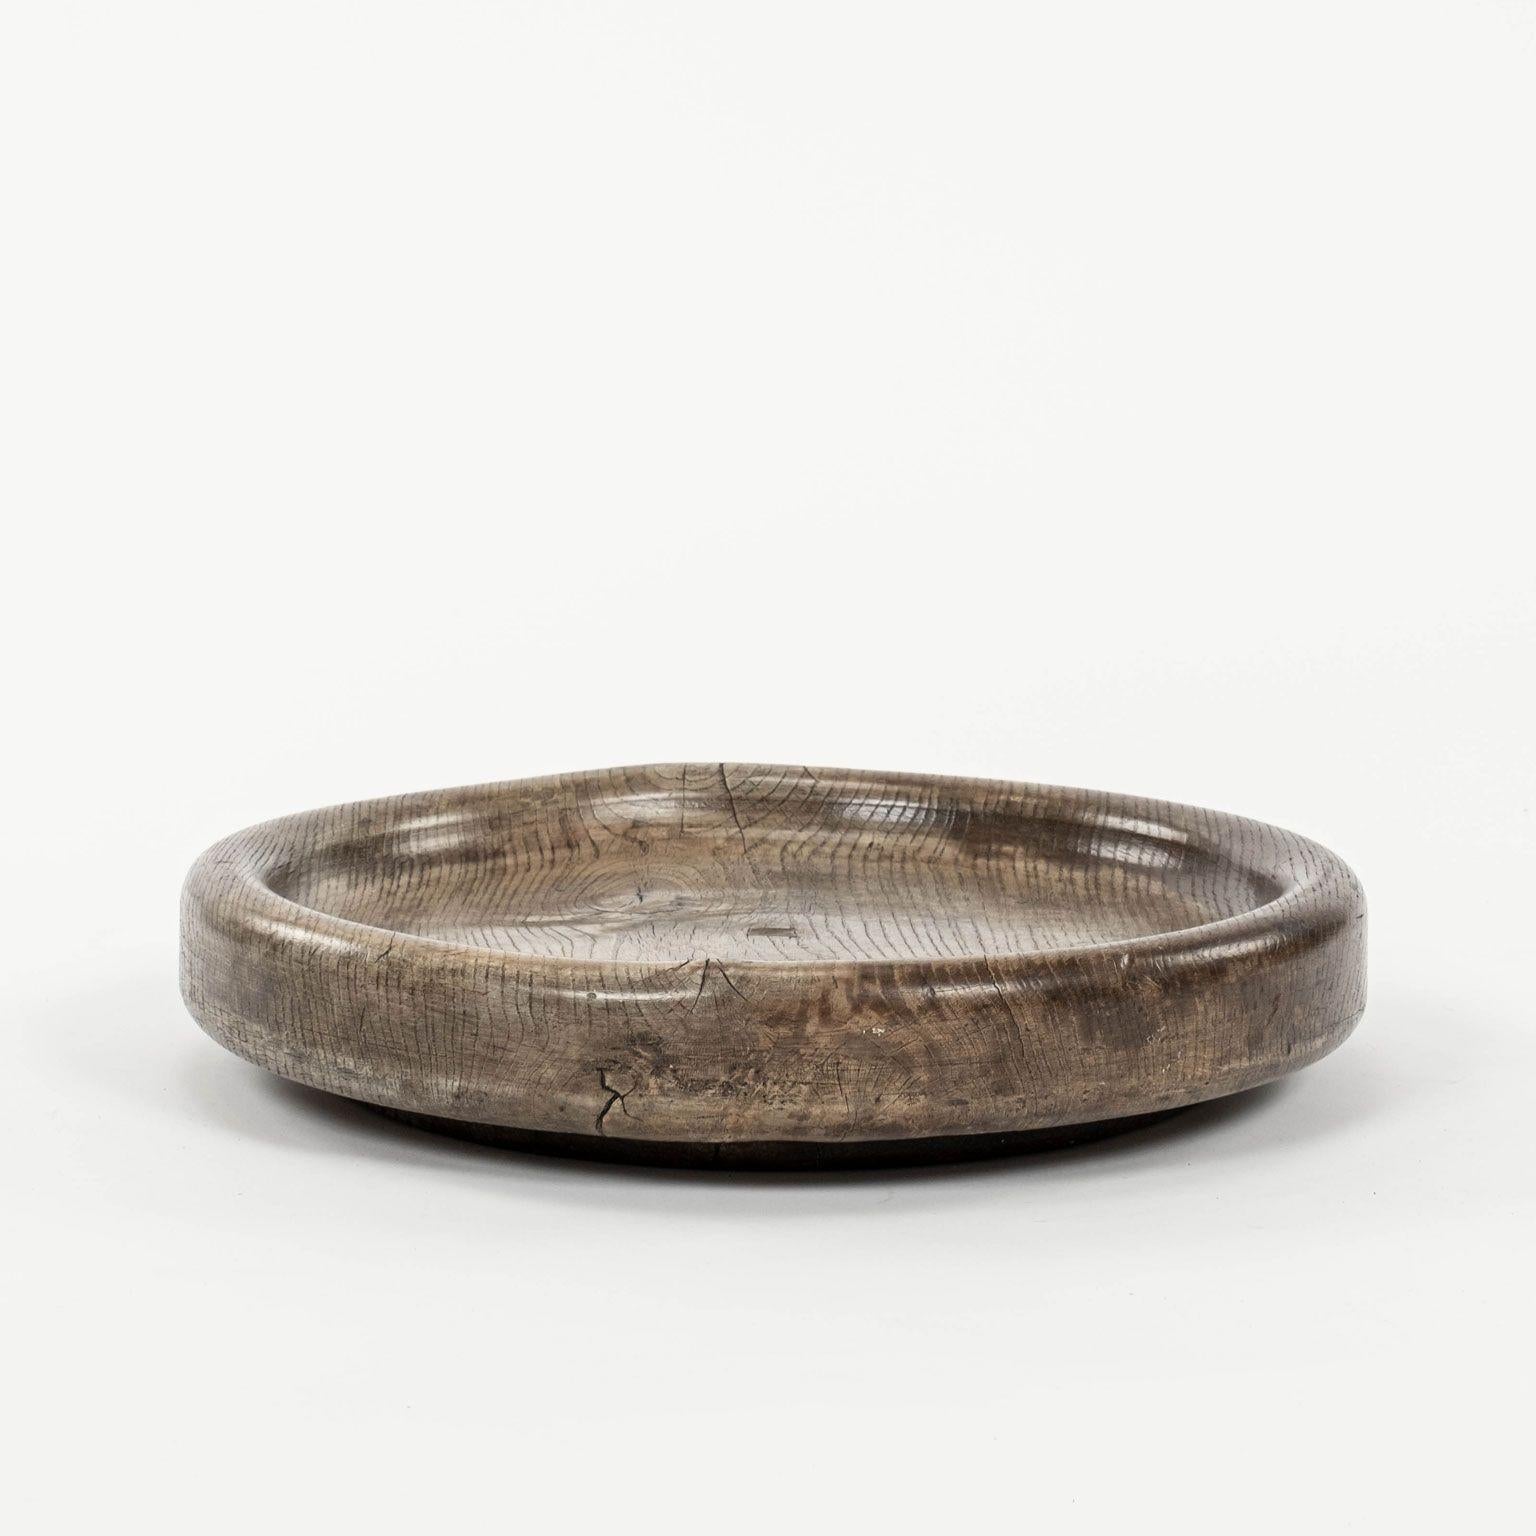 Round hand-carved elm cheese platter dating to late 19th century, England. Nice heavy weight and turned footed base.

Note: Due to regional changes in humidity and climate during shipping, antique wood may shrink and/or split along its grain, veneer